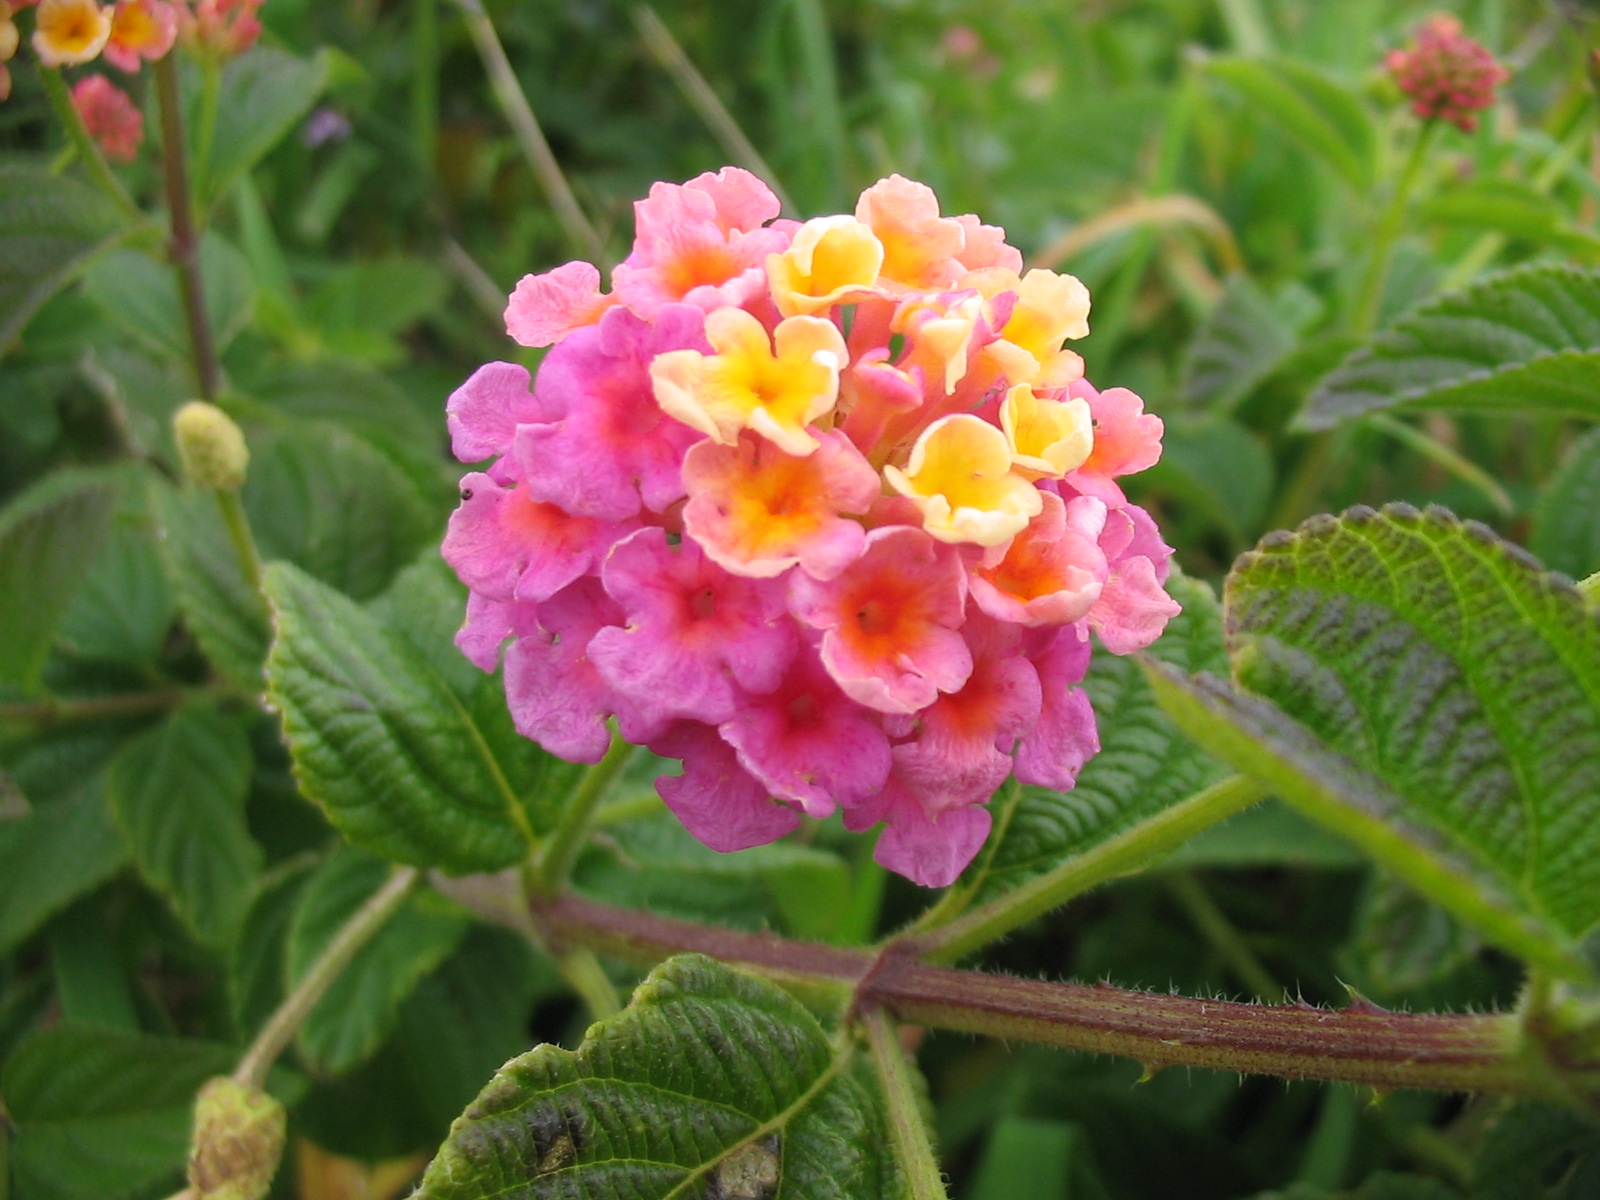 A favorite of butterflies and hummingbirds alike, lantana offers colorful red, yellow, orange, pink, lavender, or white flowers. These heat-loving, drought-resistant plants will fit well in sunny spots in your garden